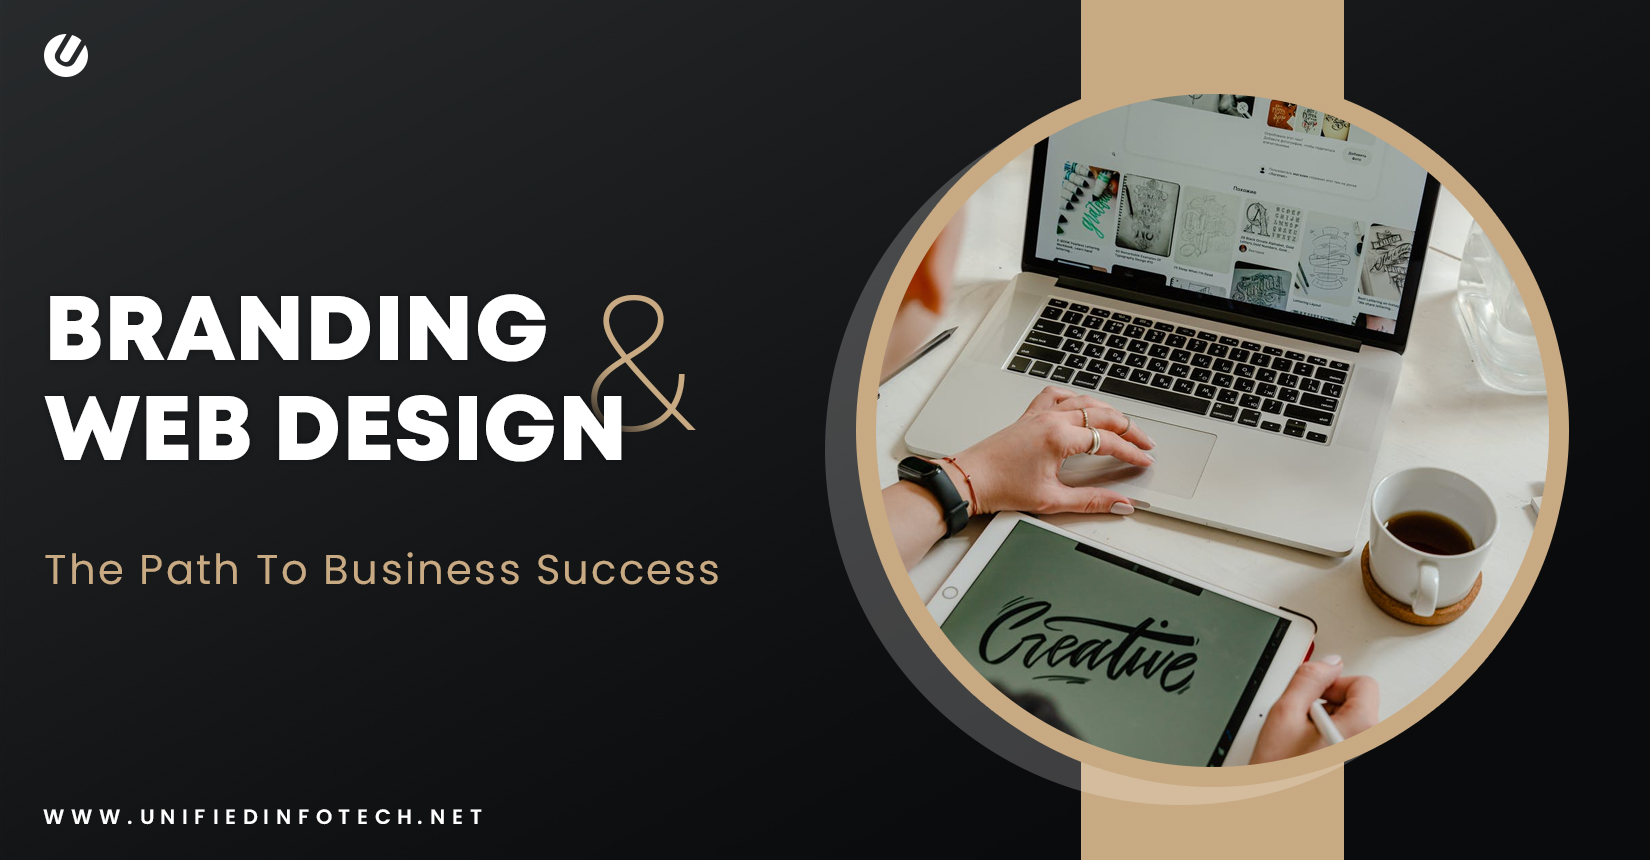 Our Proven Take On Branding And Website Design: A Five-Step Journey